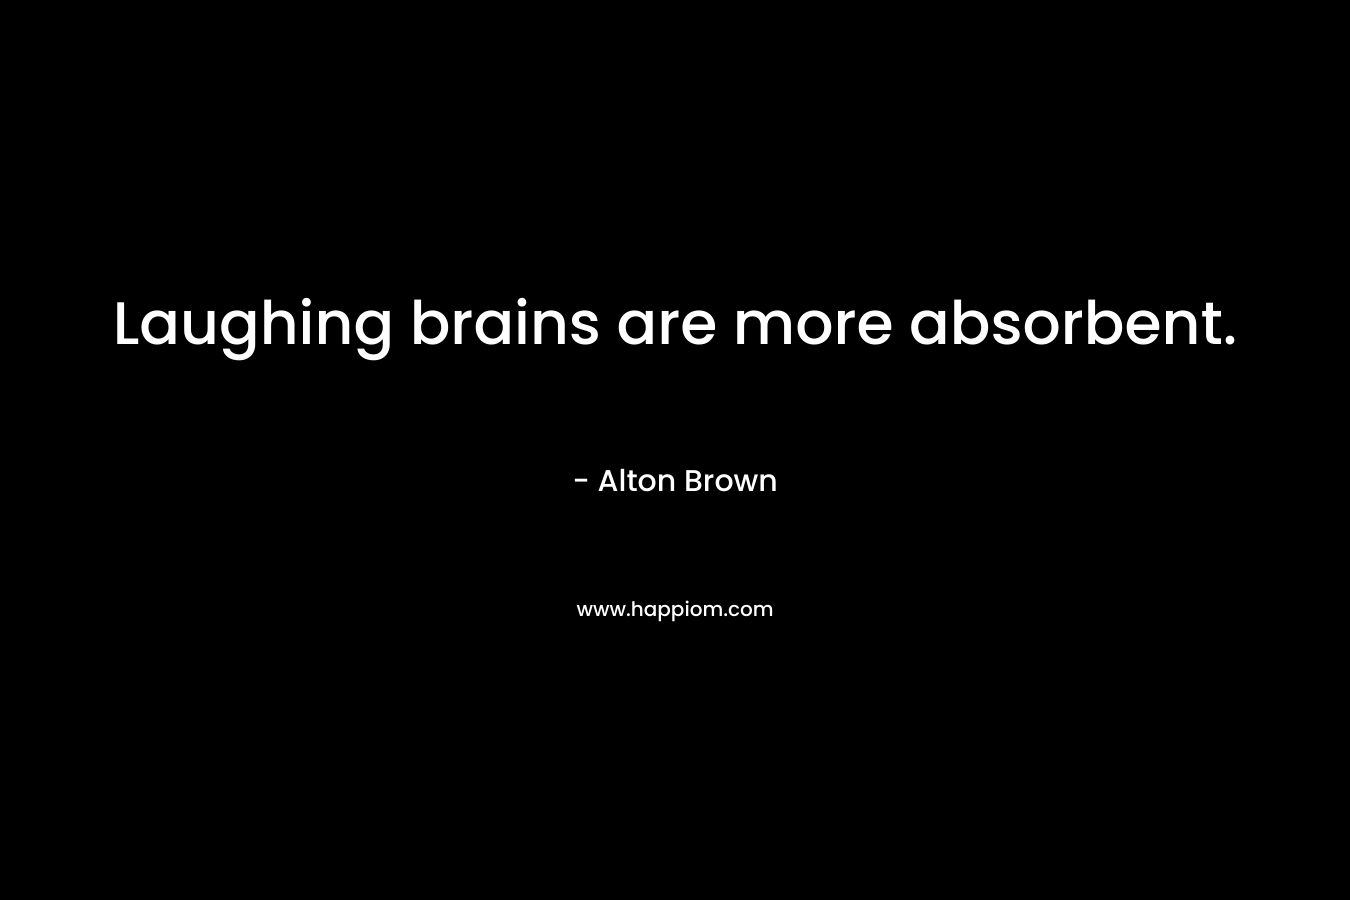 Laughing brains are more absorbent. – Alton Brown